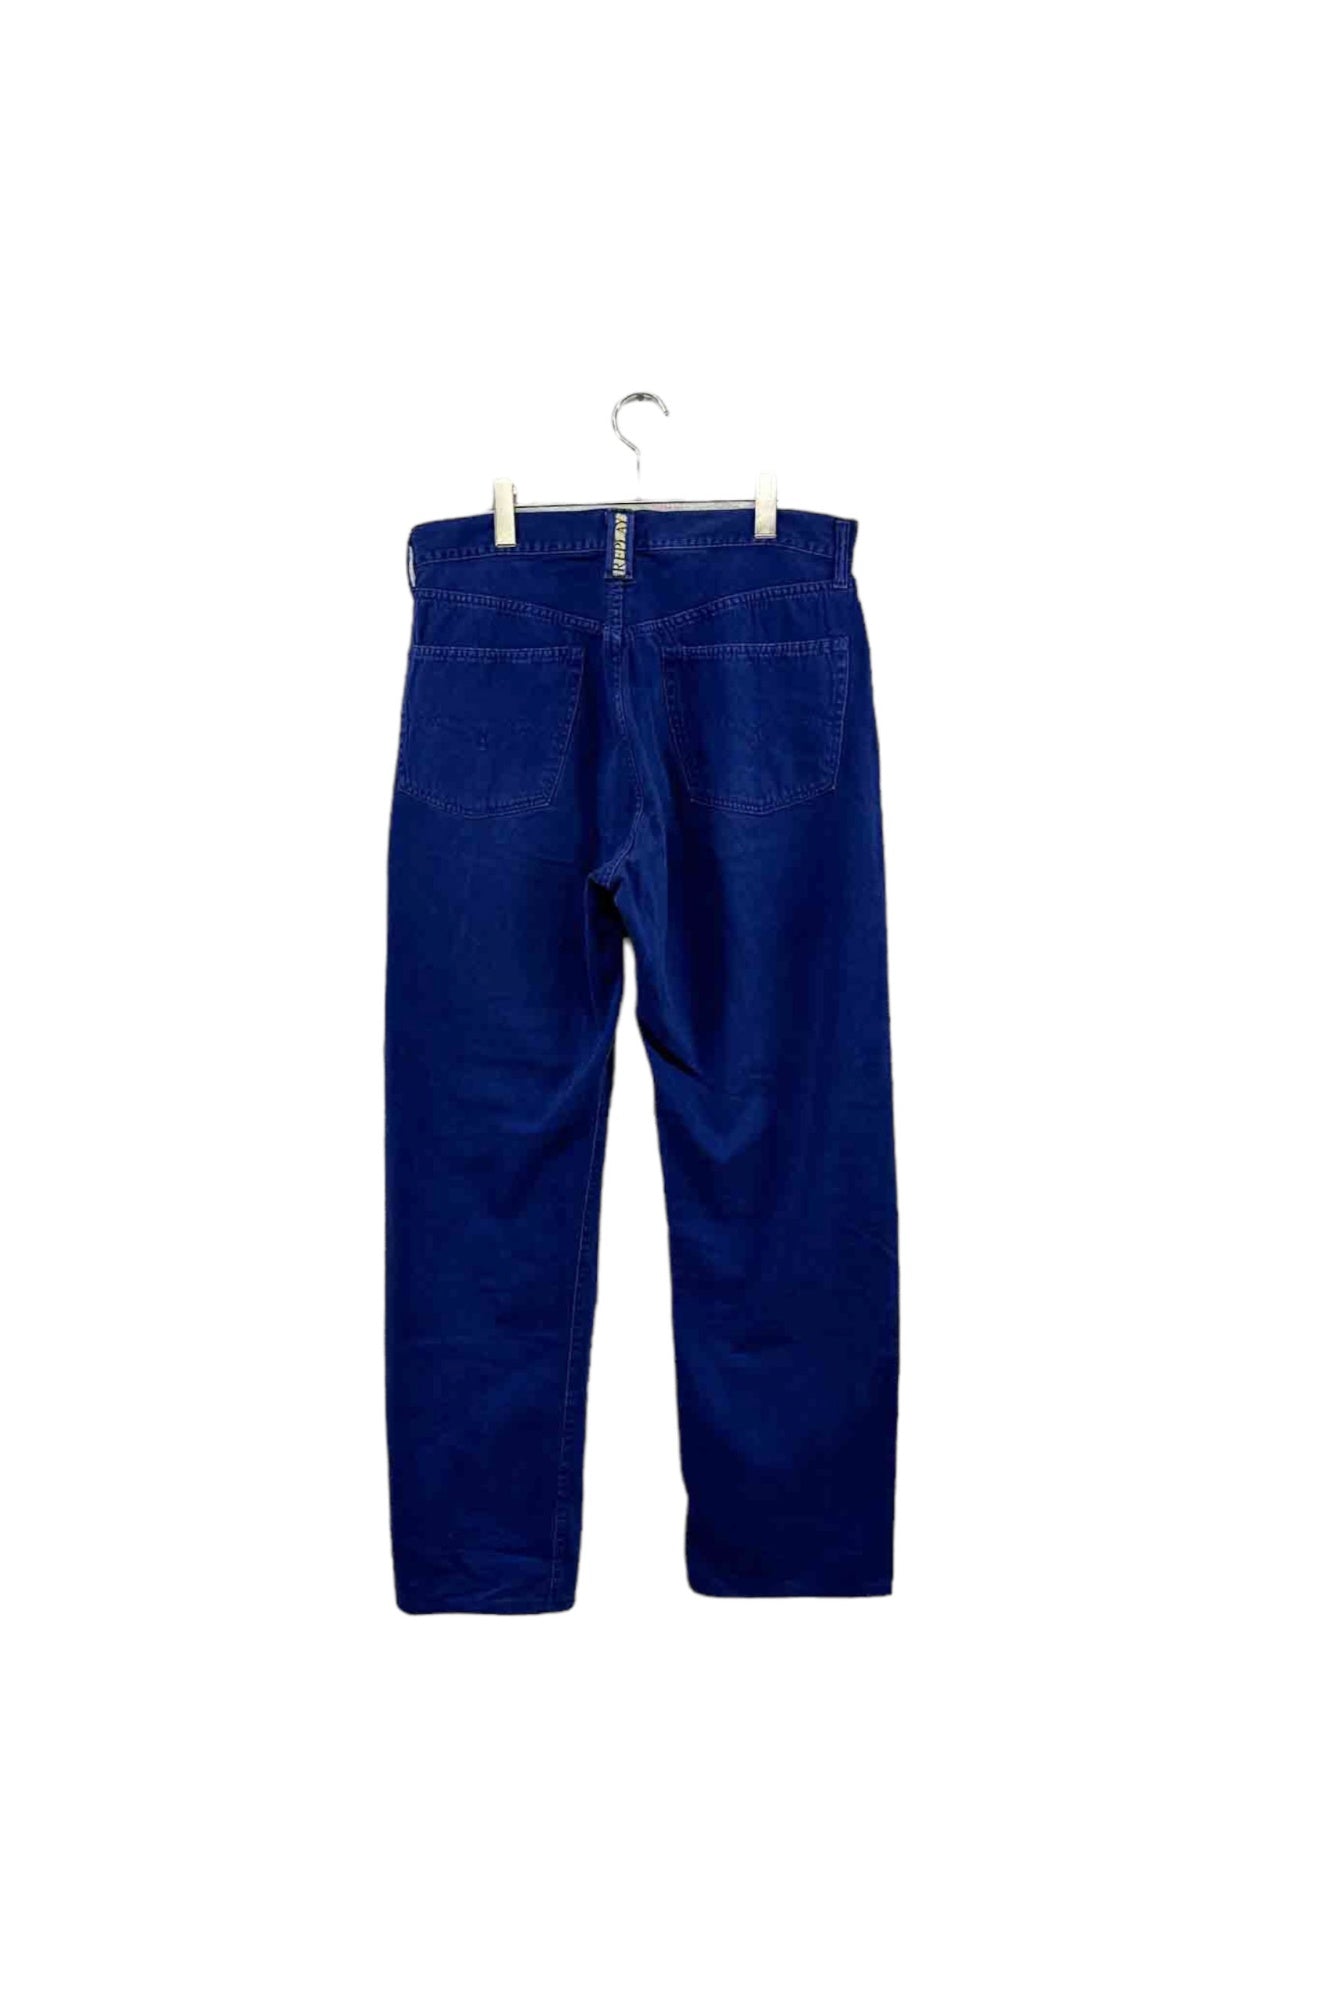 Made in ITALY REPLAY blue pants